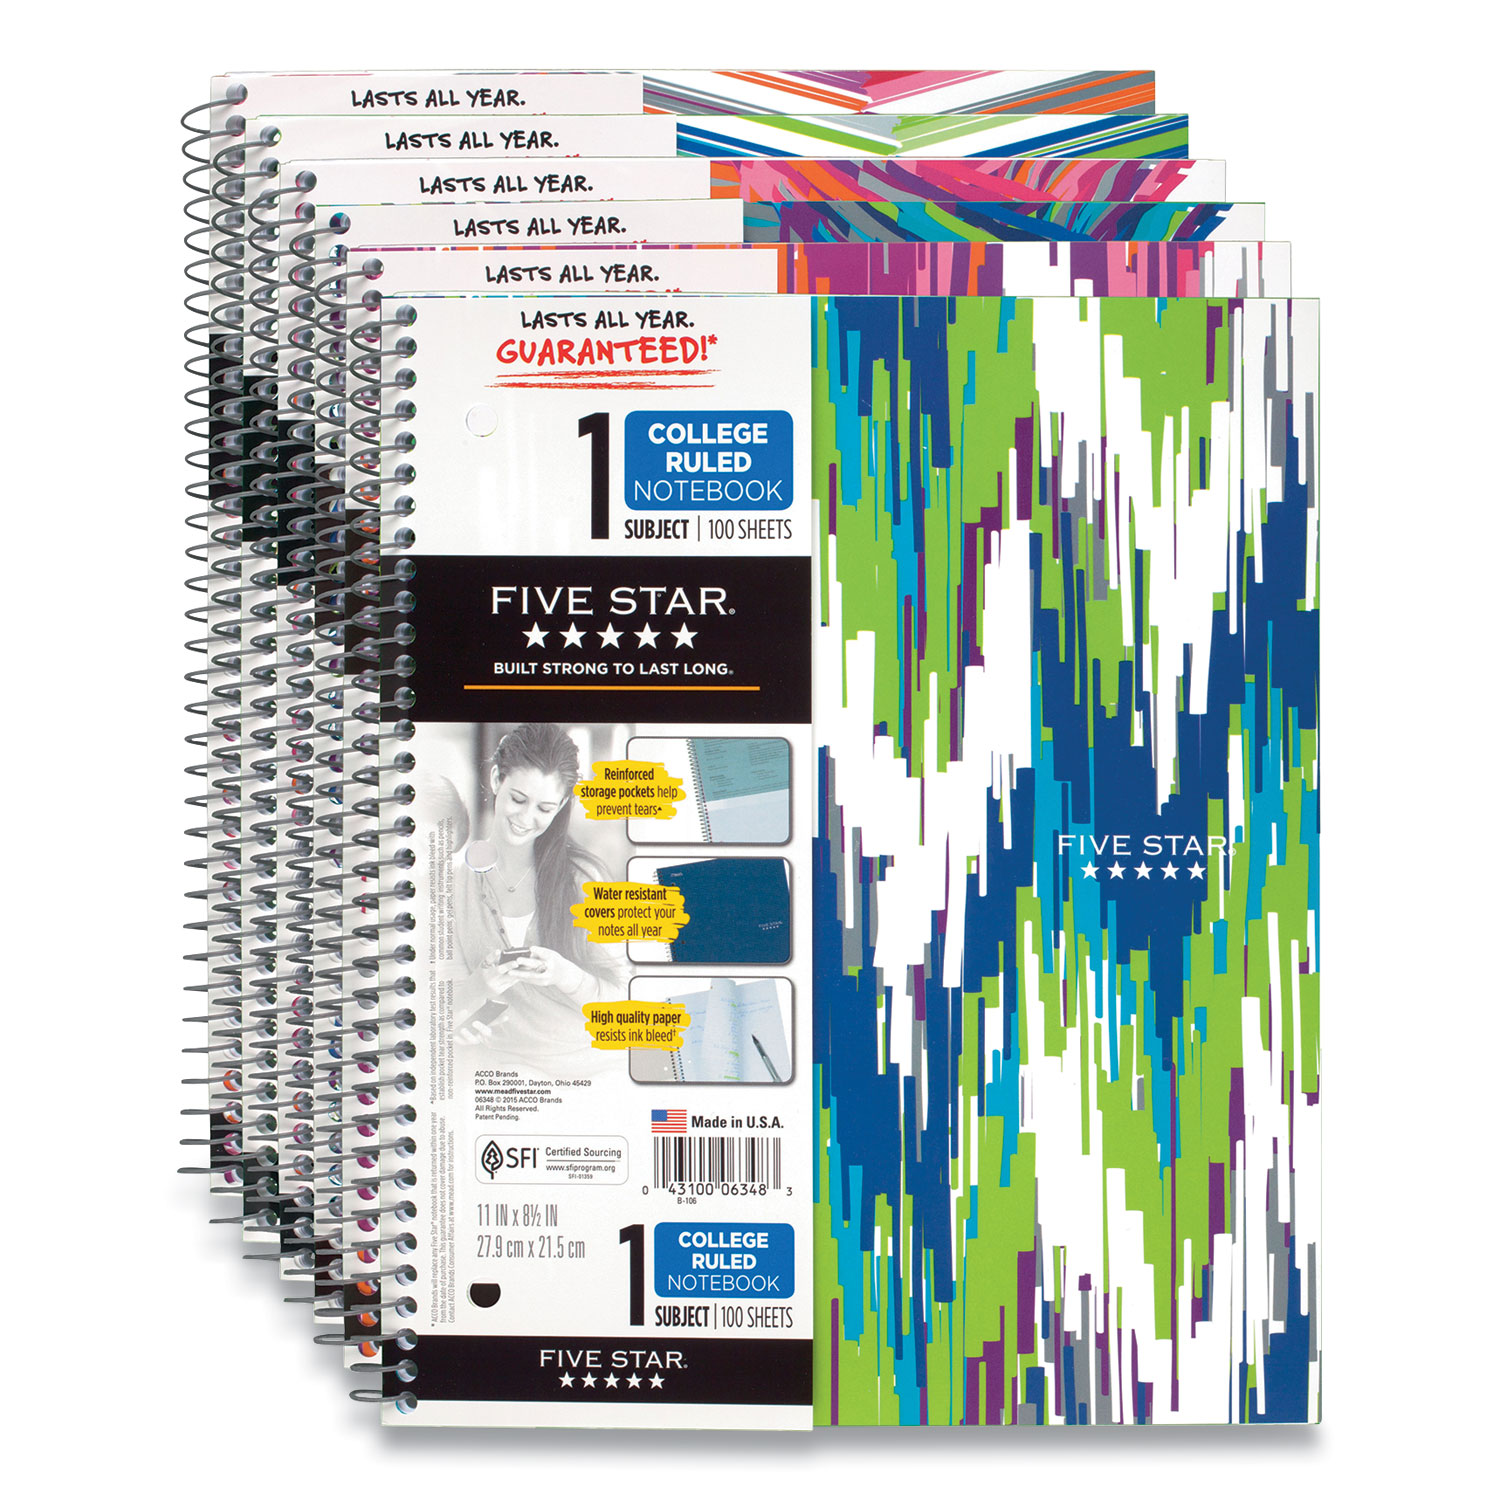  Five Star 06348 Style Wirebound Notebook, Medium/College Rule, Assorted Colors, 8.5 x 11, 100 Sheets (ACC673454) 